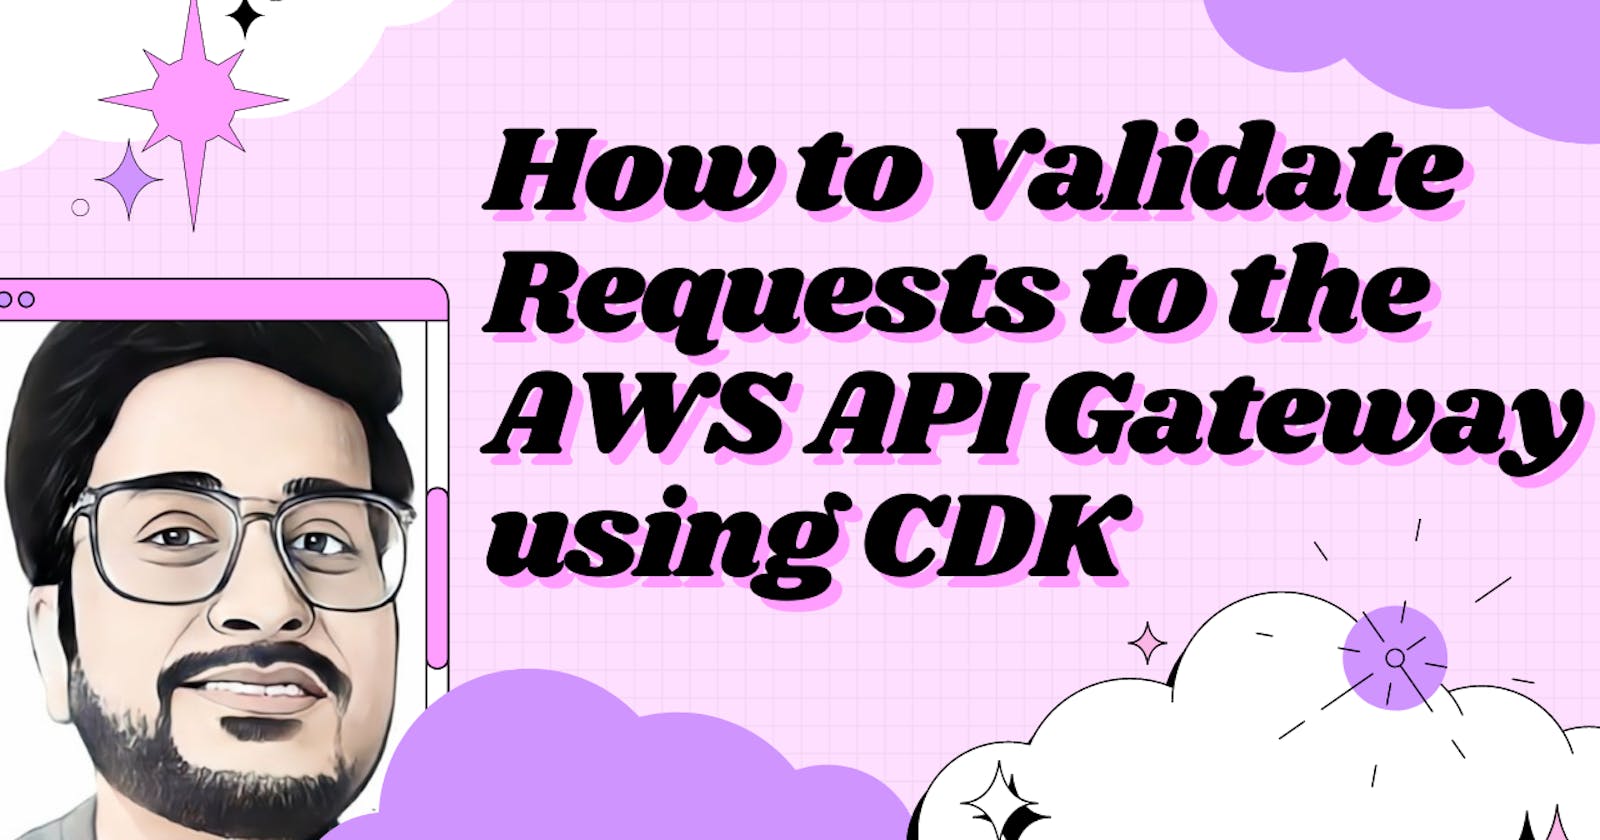 How to Validate Requests to the AWS API Gateway using CDK